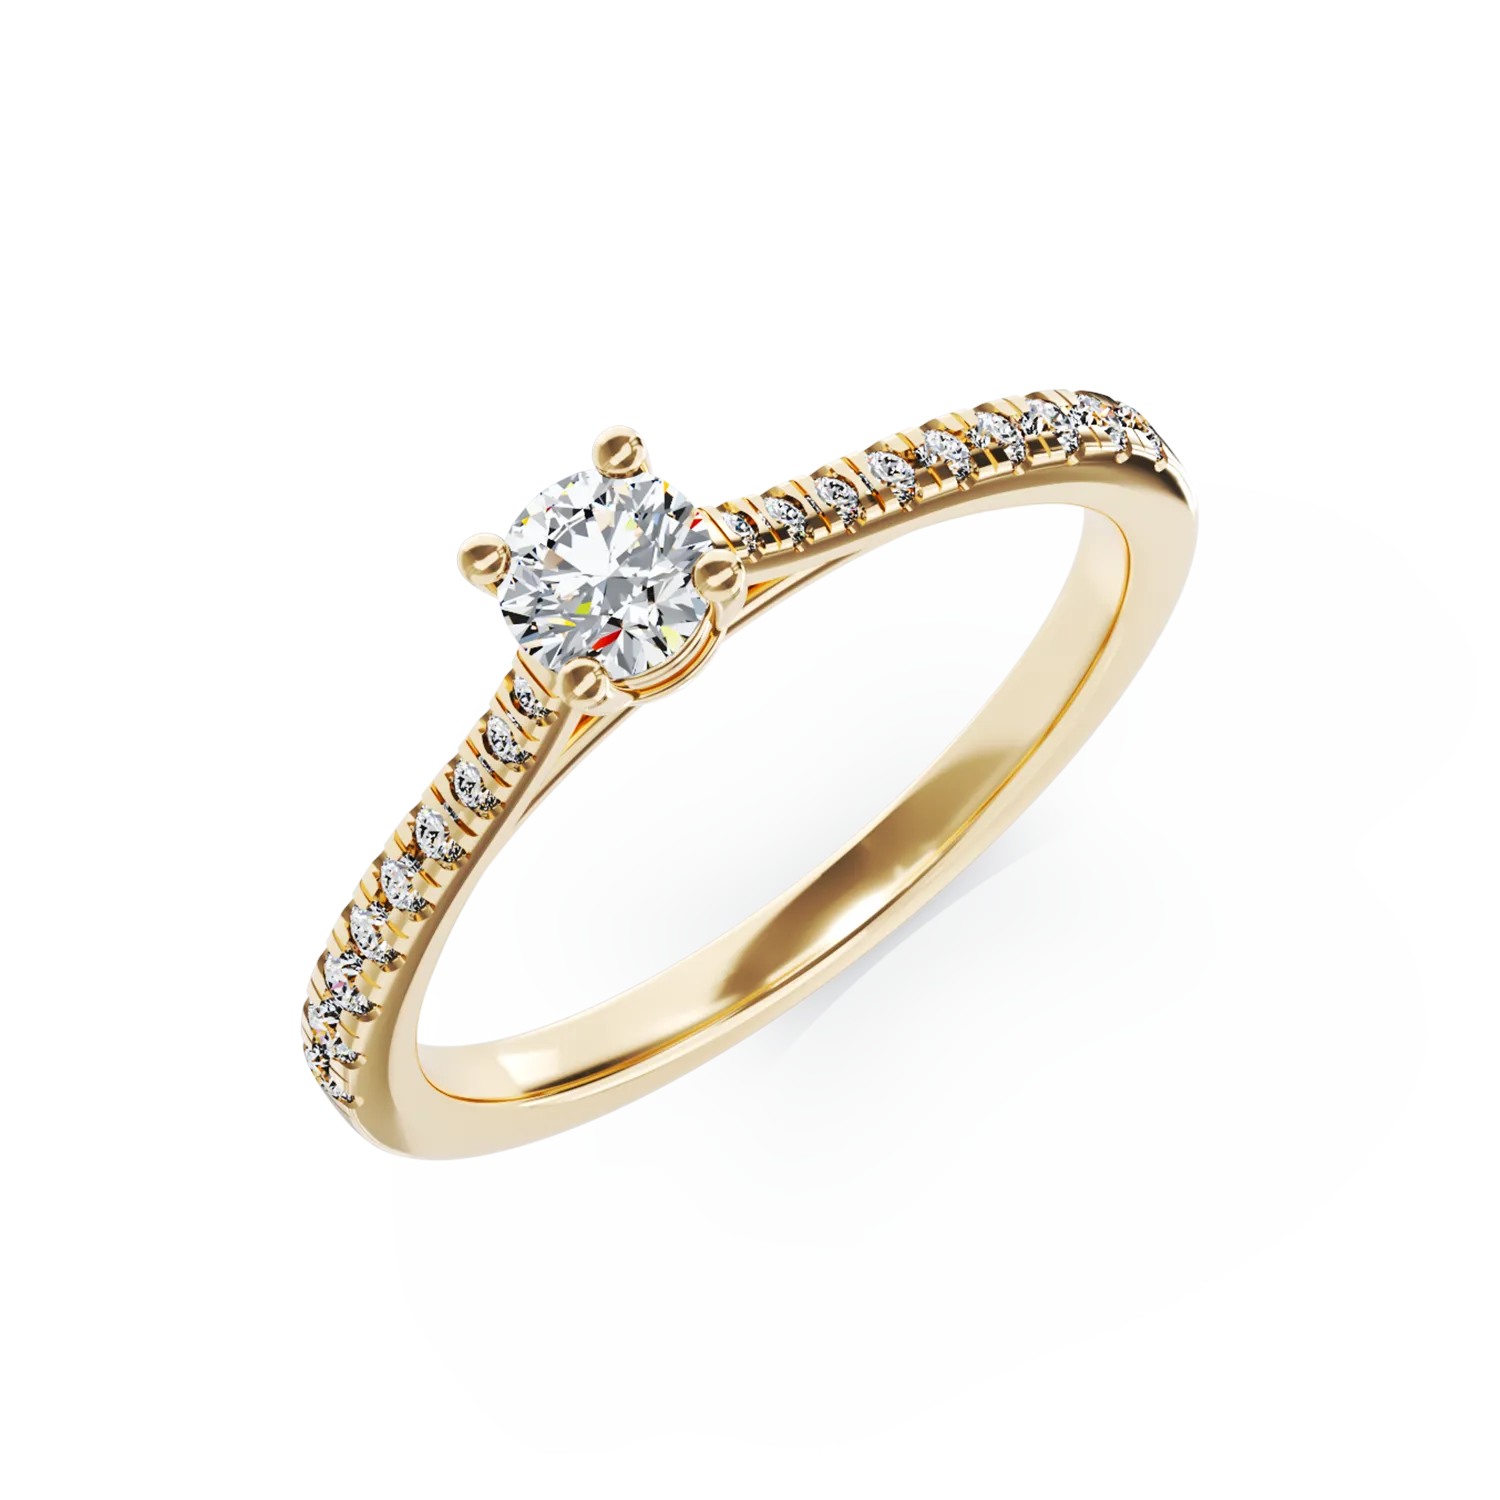 18K yellow gold engagement ring with 0.24ct diamond and 0.18ct diamonds